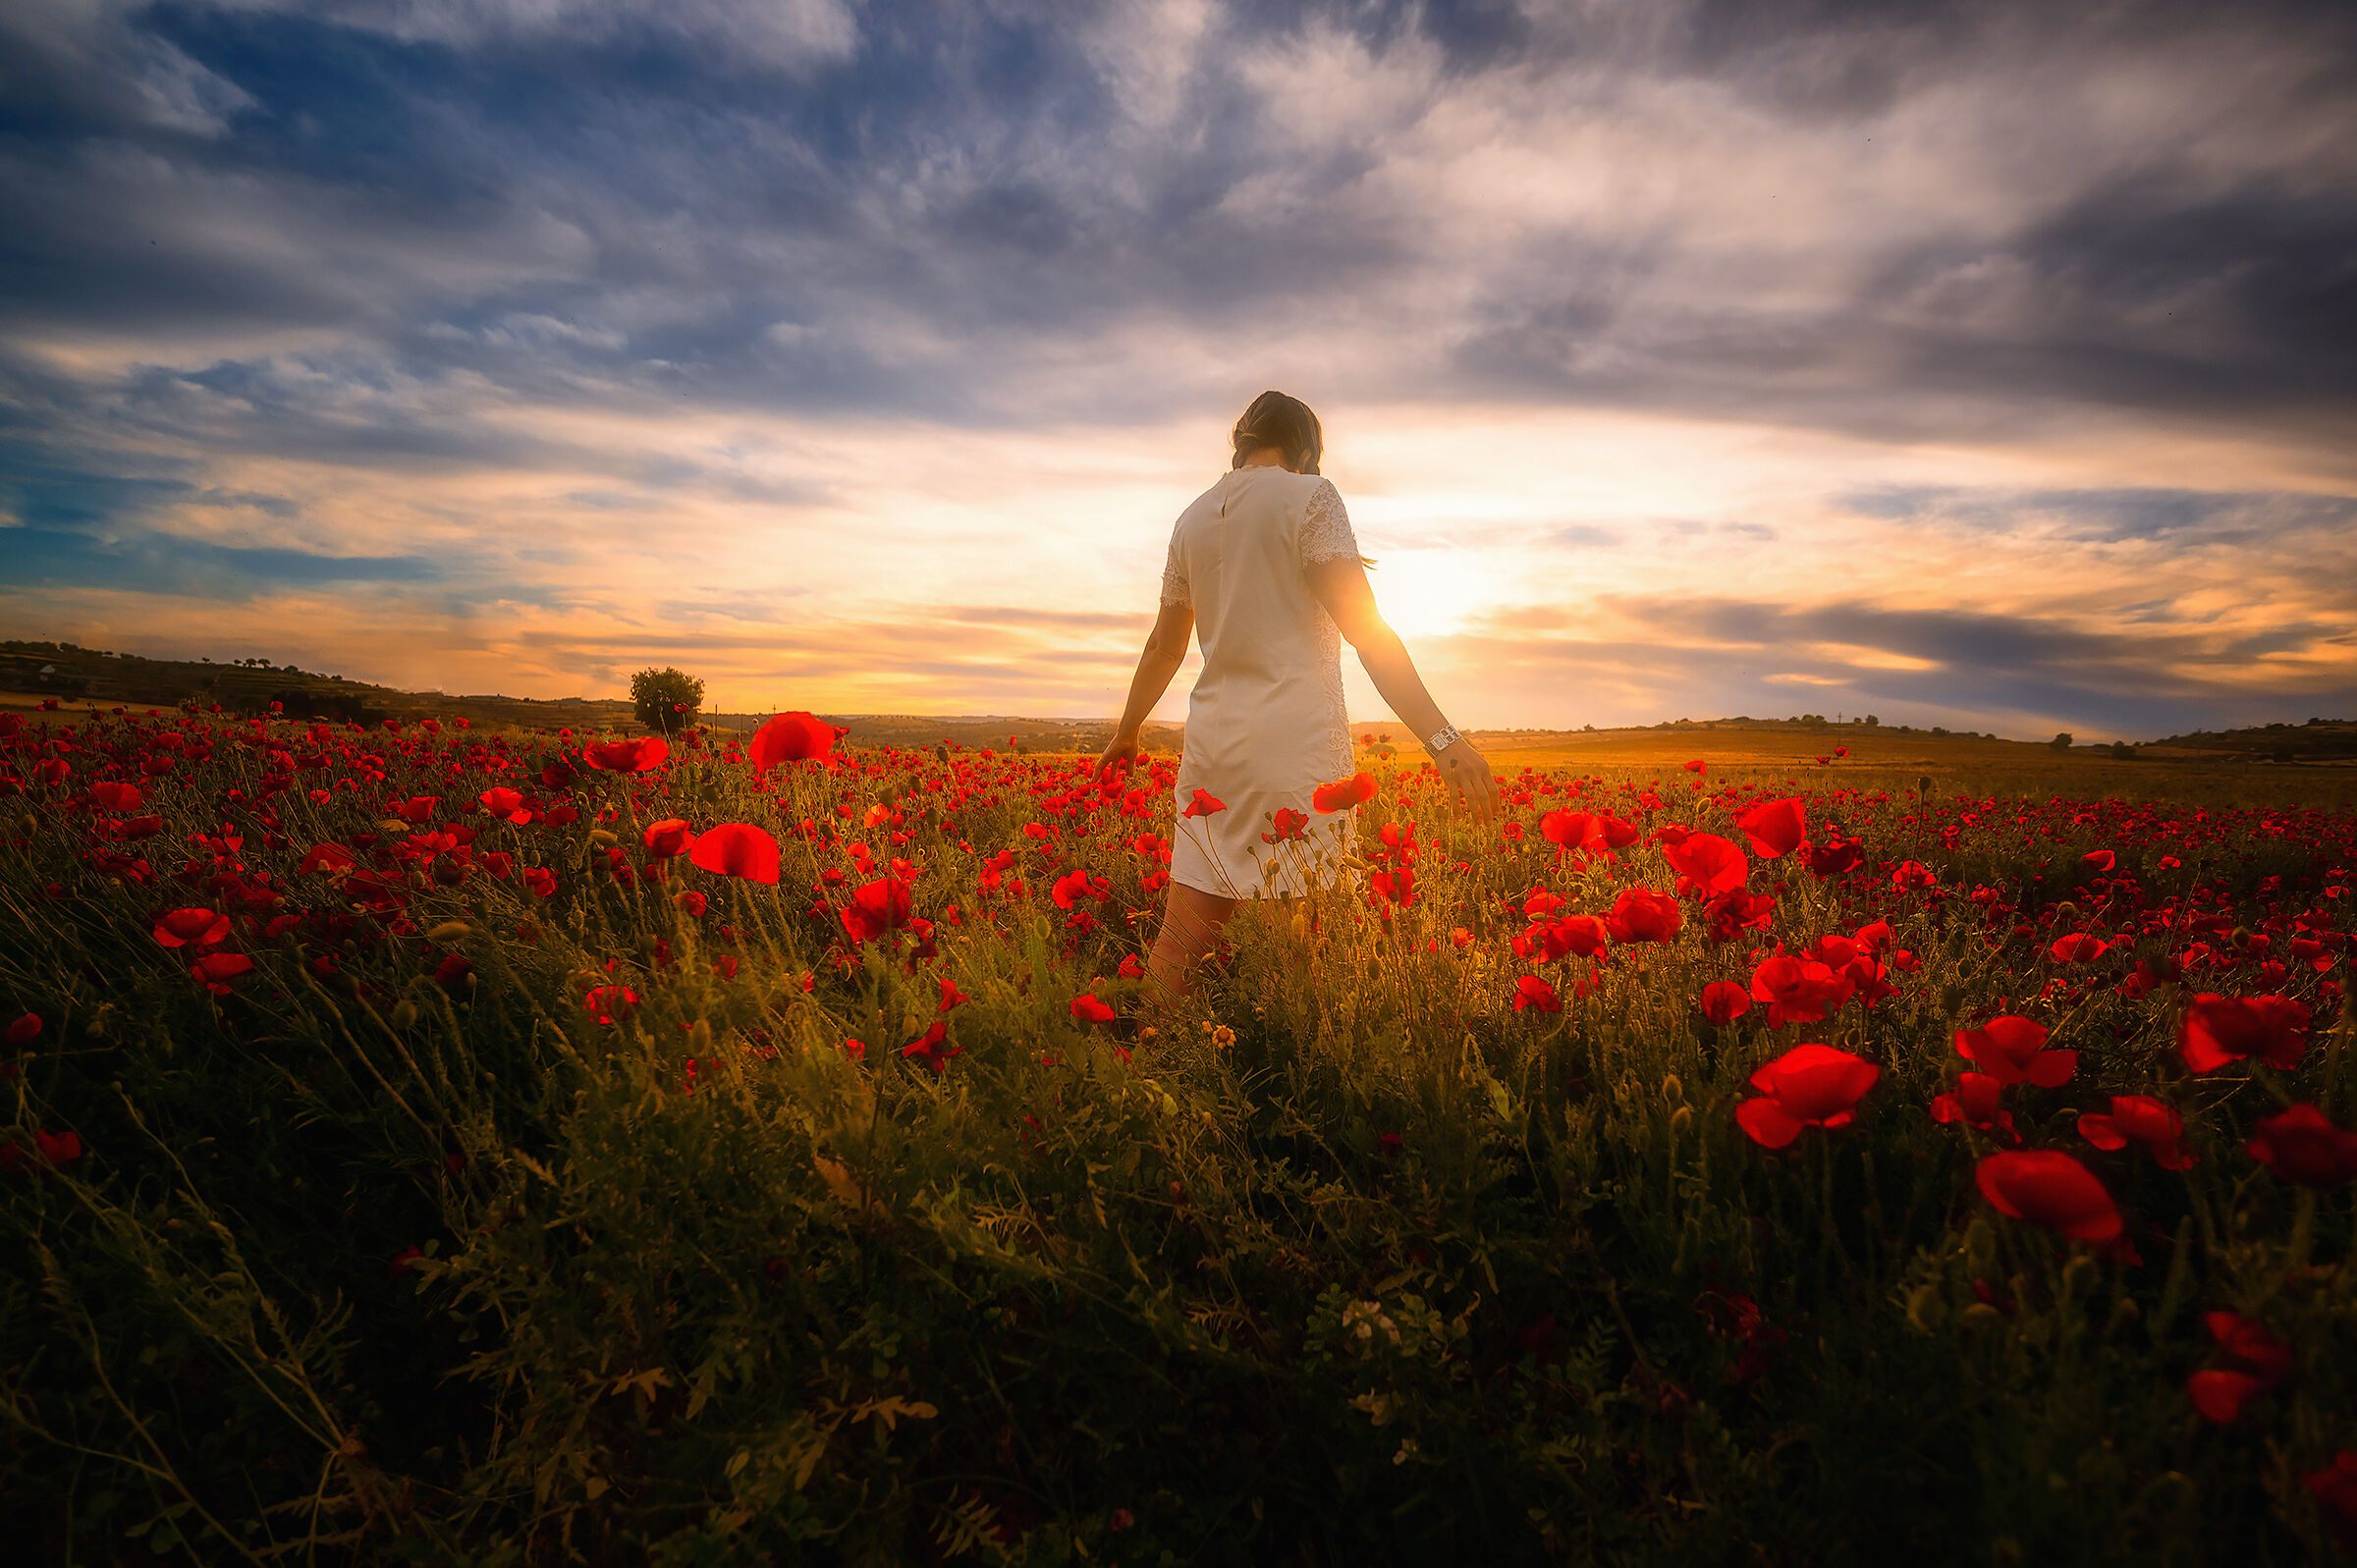 The Girl among the Poppies...